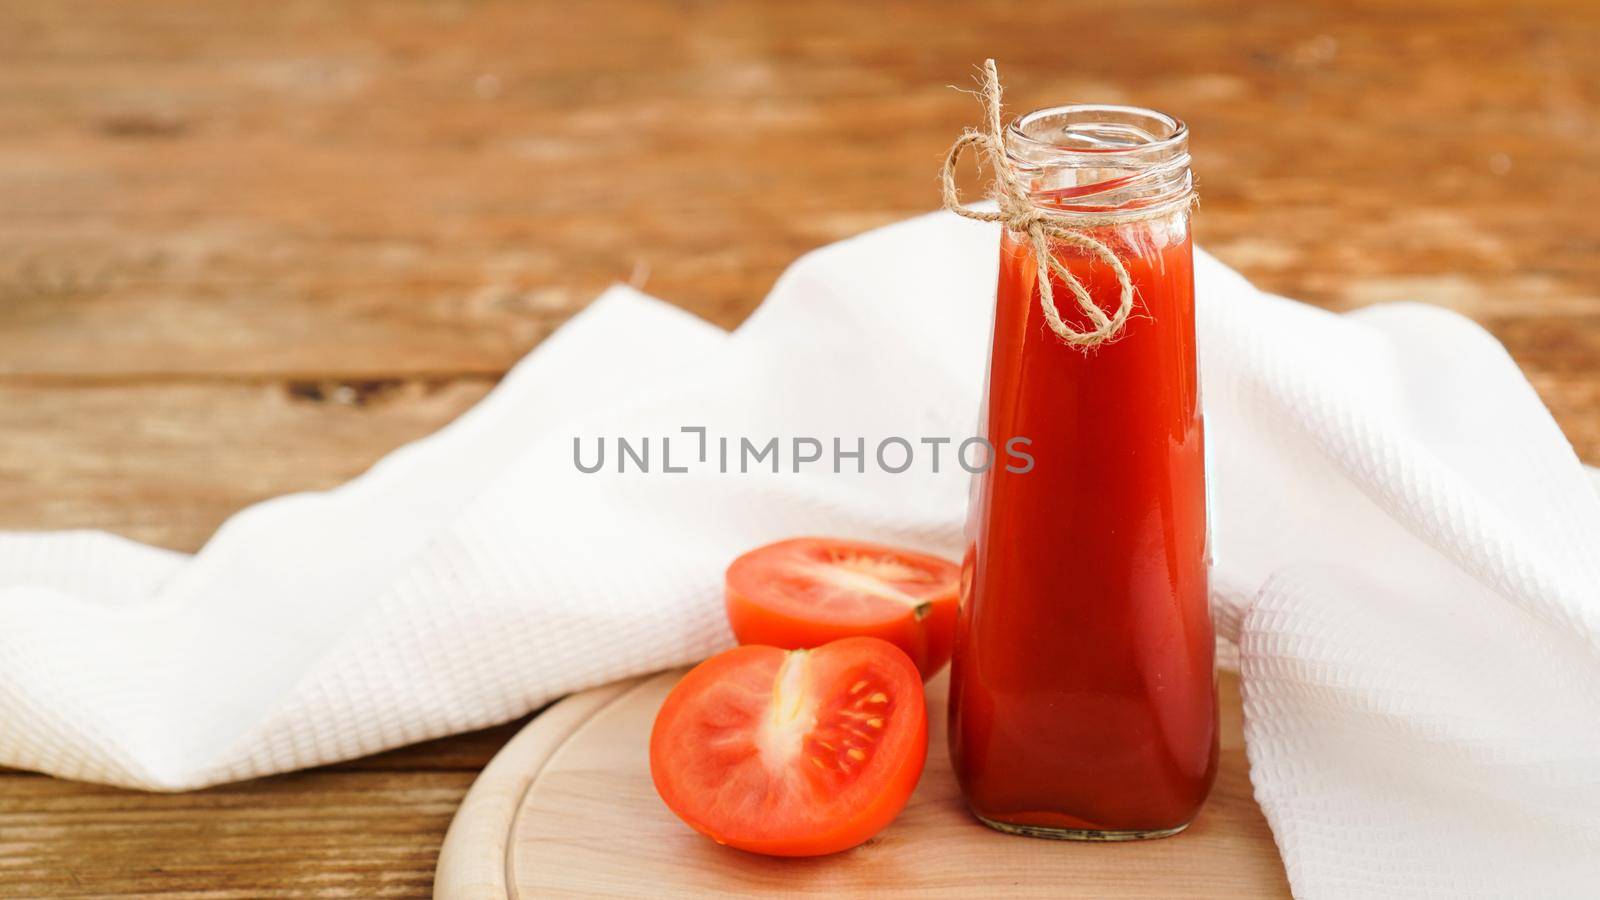 Tomato juice in glass bottle and fresh tomatoes on wooden background by natali_brill